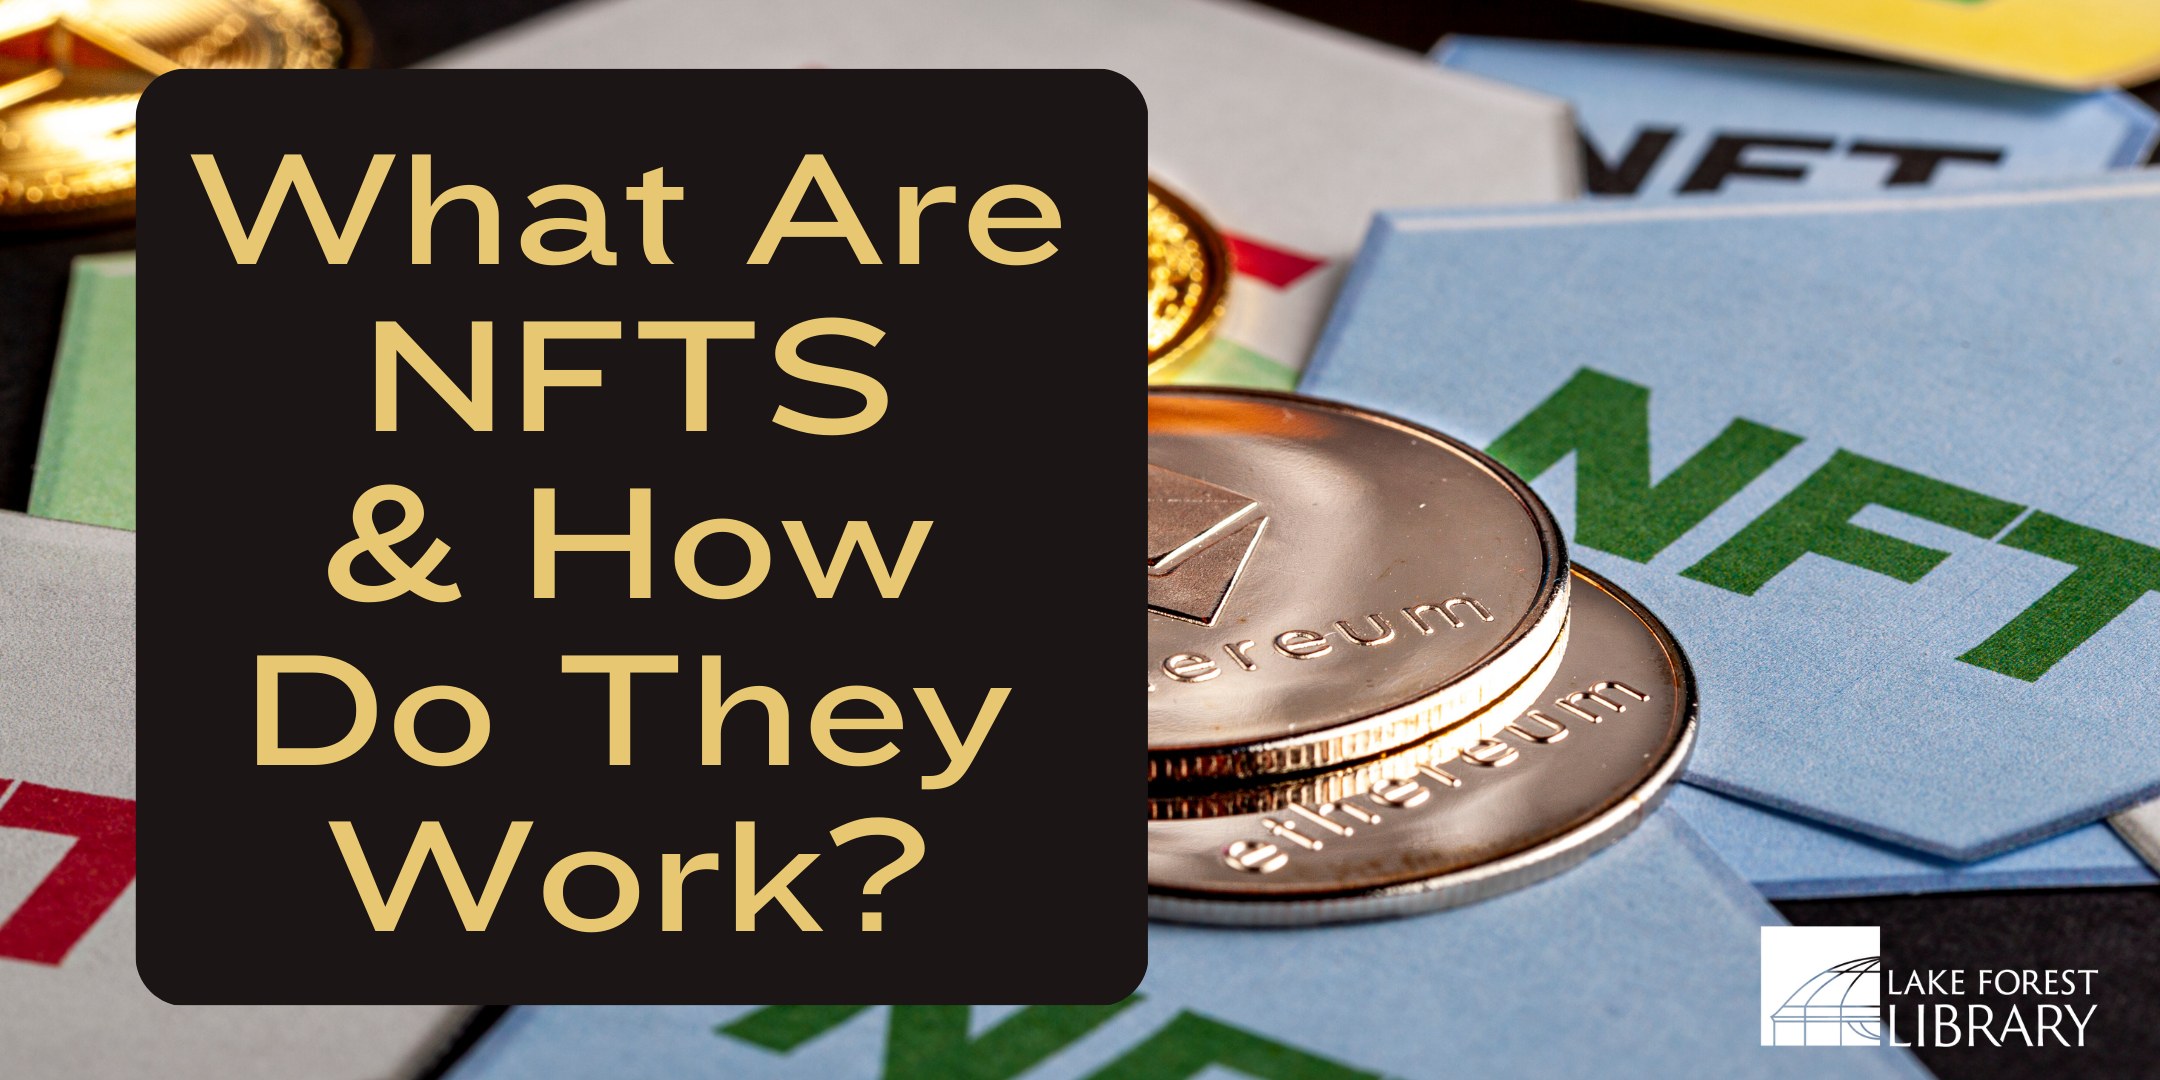 image of "What Are NFTs & How Do They Work?"